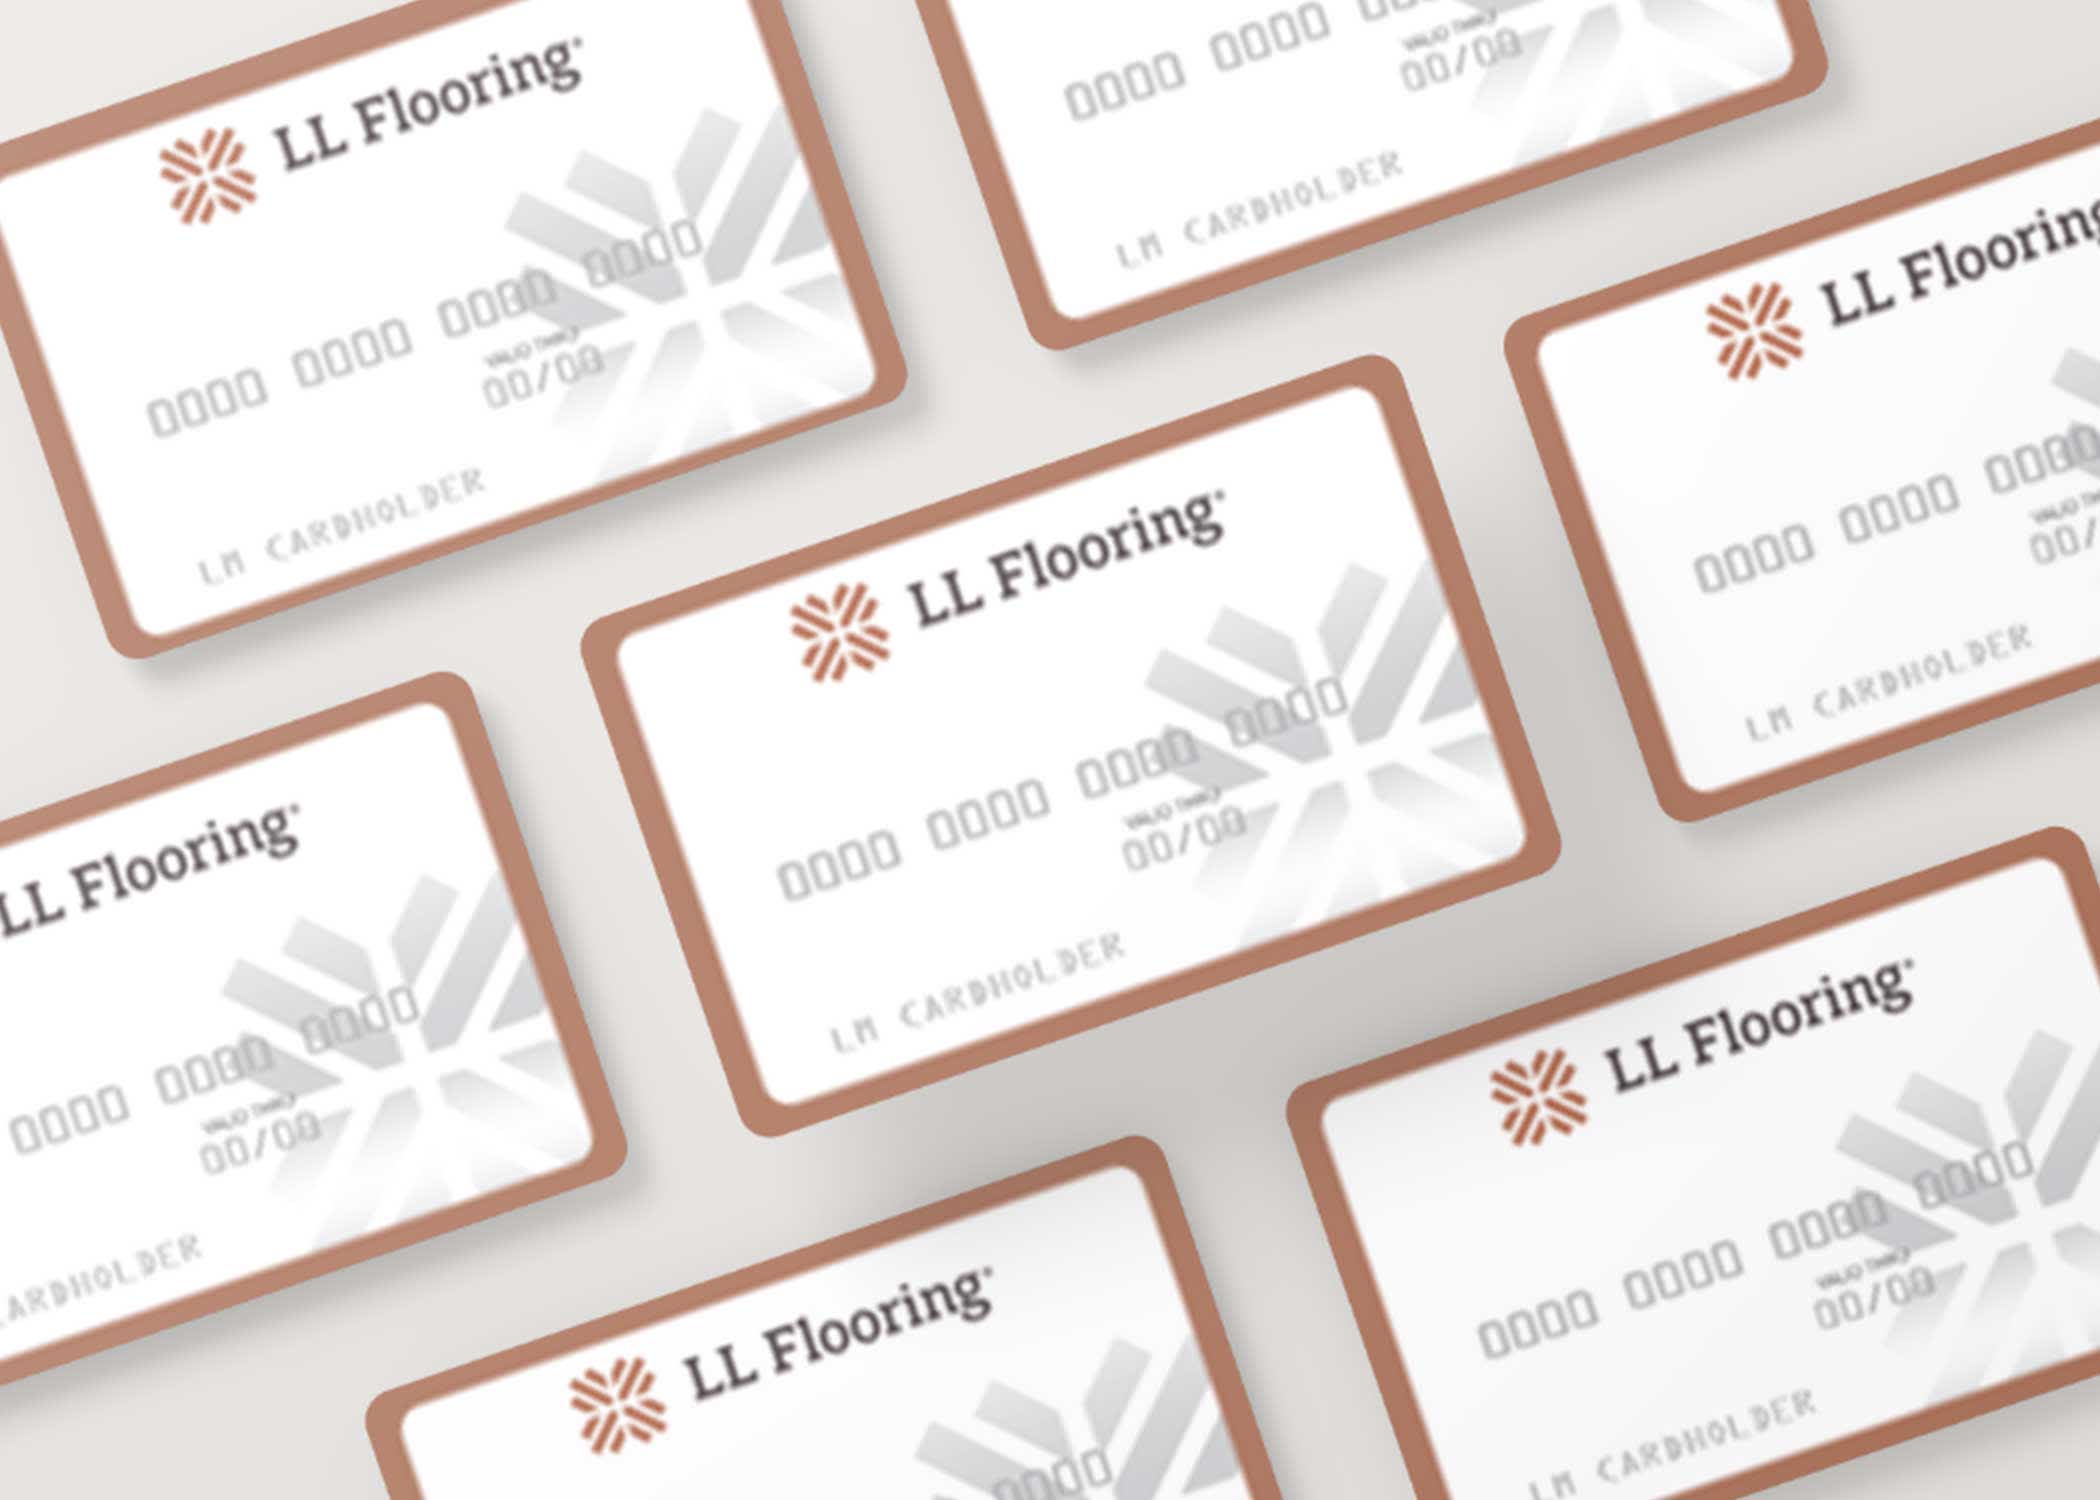 ll flooring credit card collage on beige background